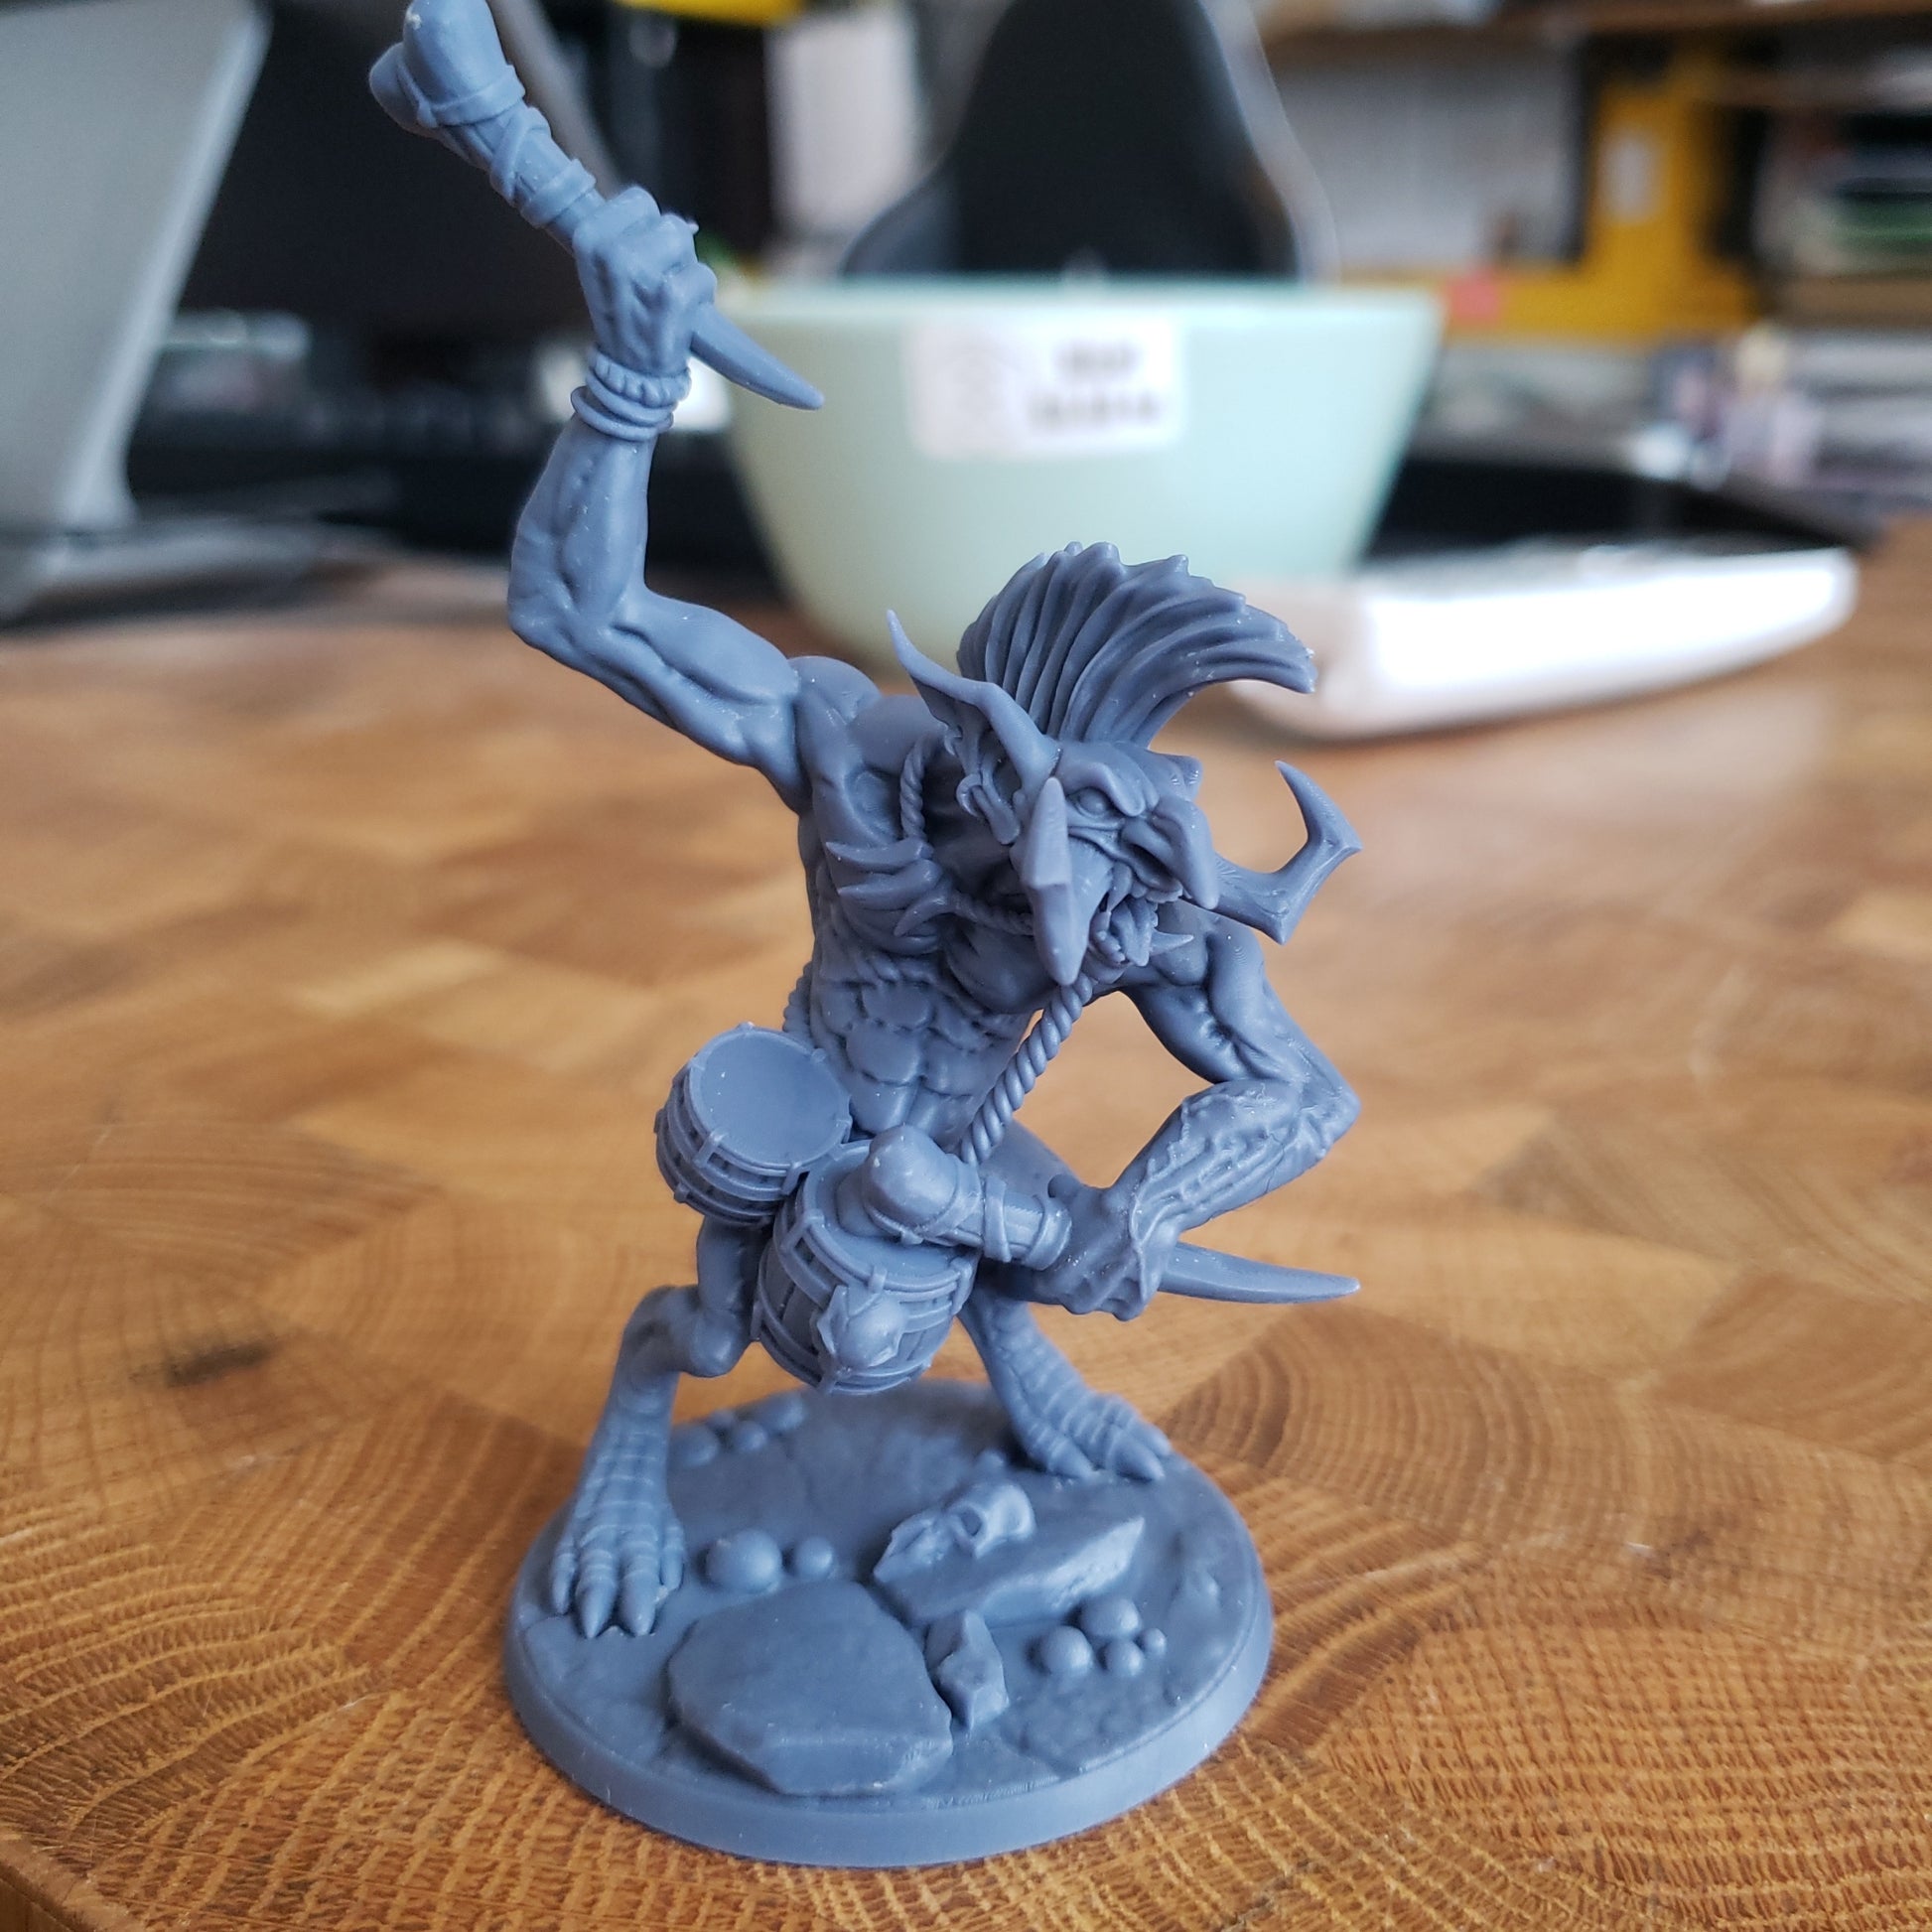 Image shows an example of a 3D printed troll drummer miniature printed in-house at All Systems Go